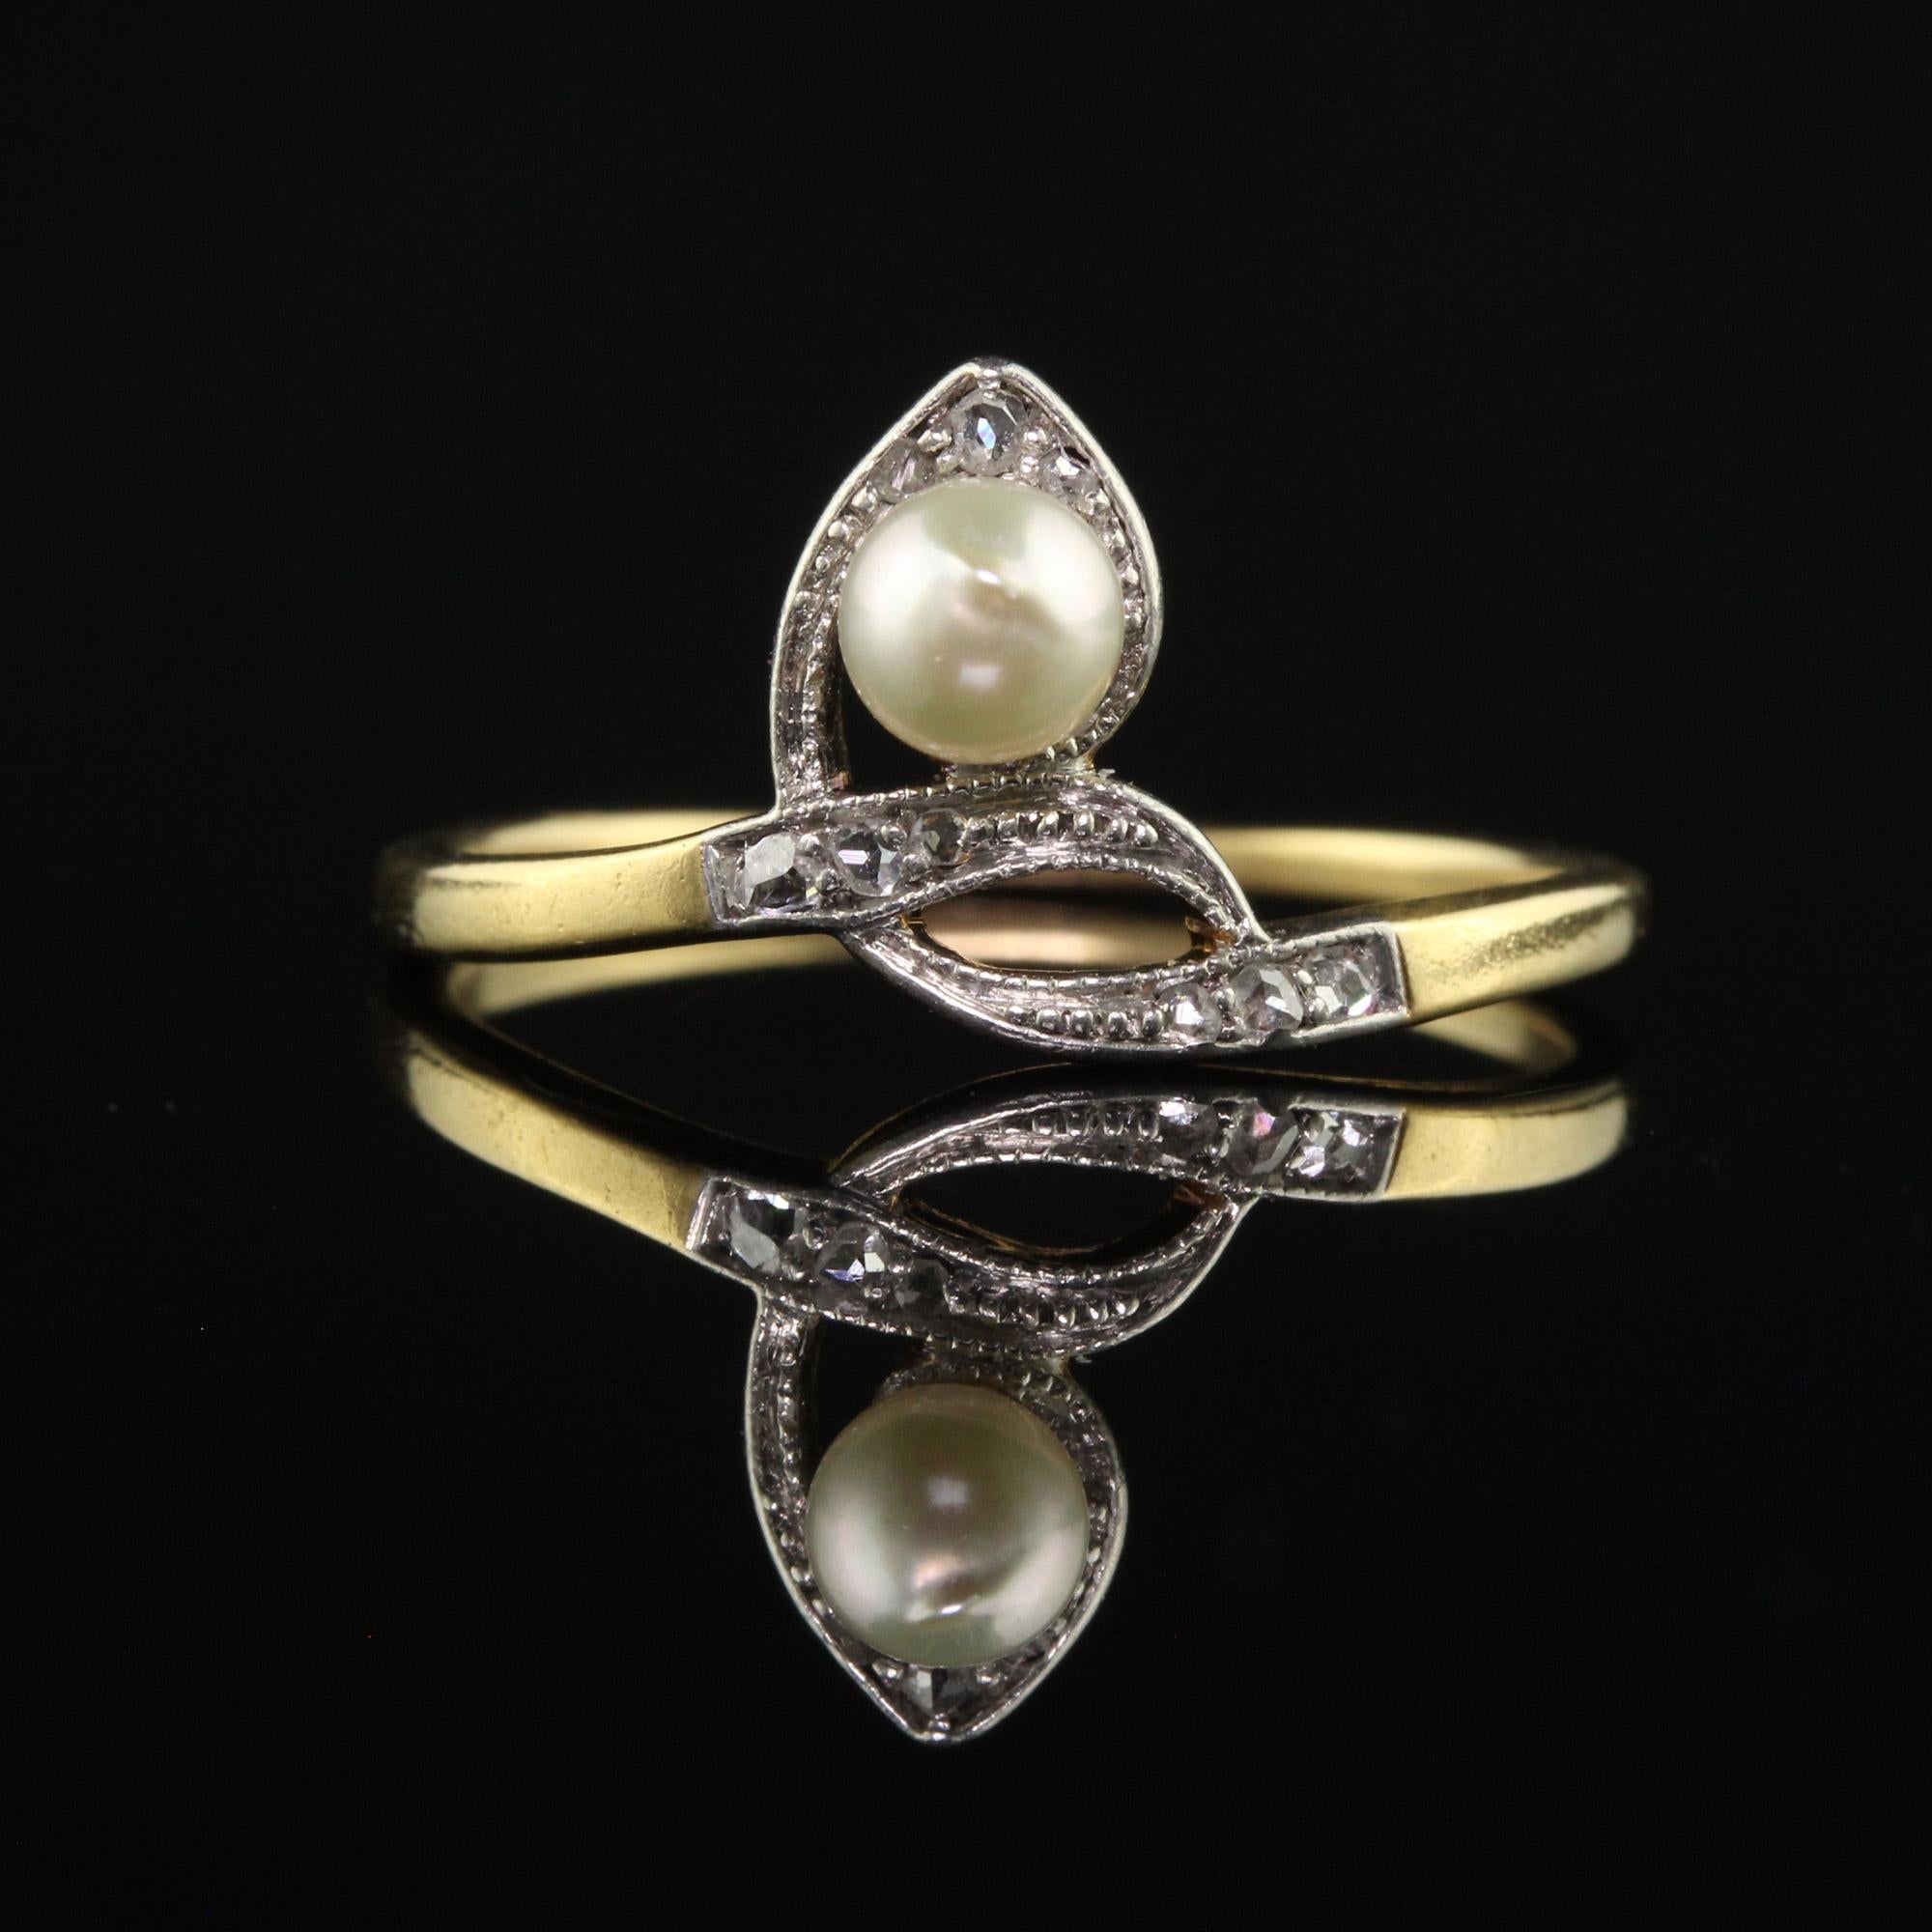 Antique Art Deco 18K Yellow Gold Rose Cut Diamond and Pearl Ring 1